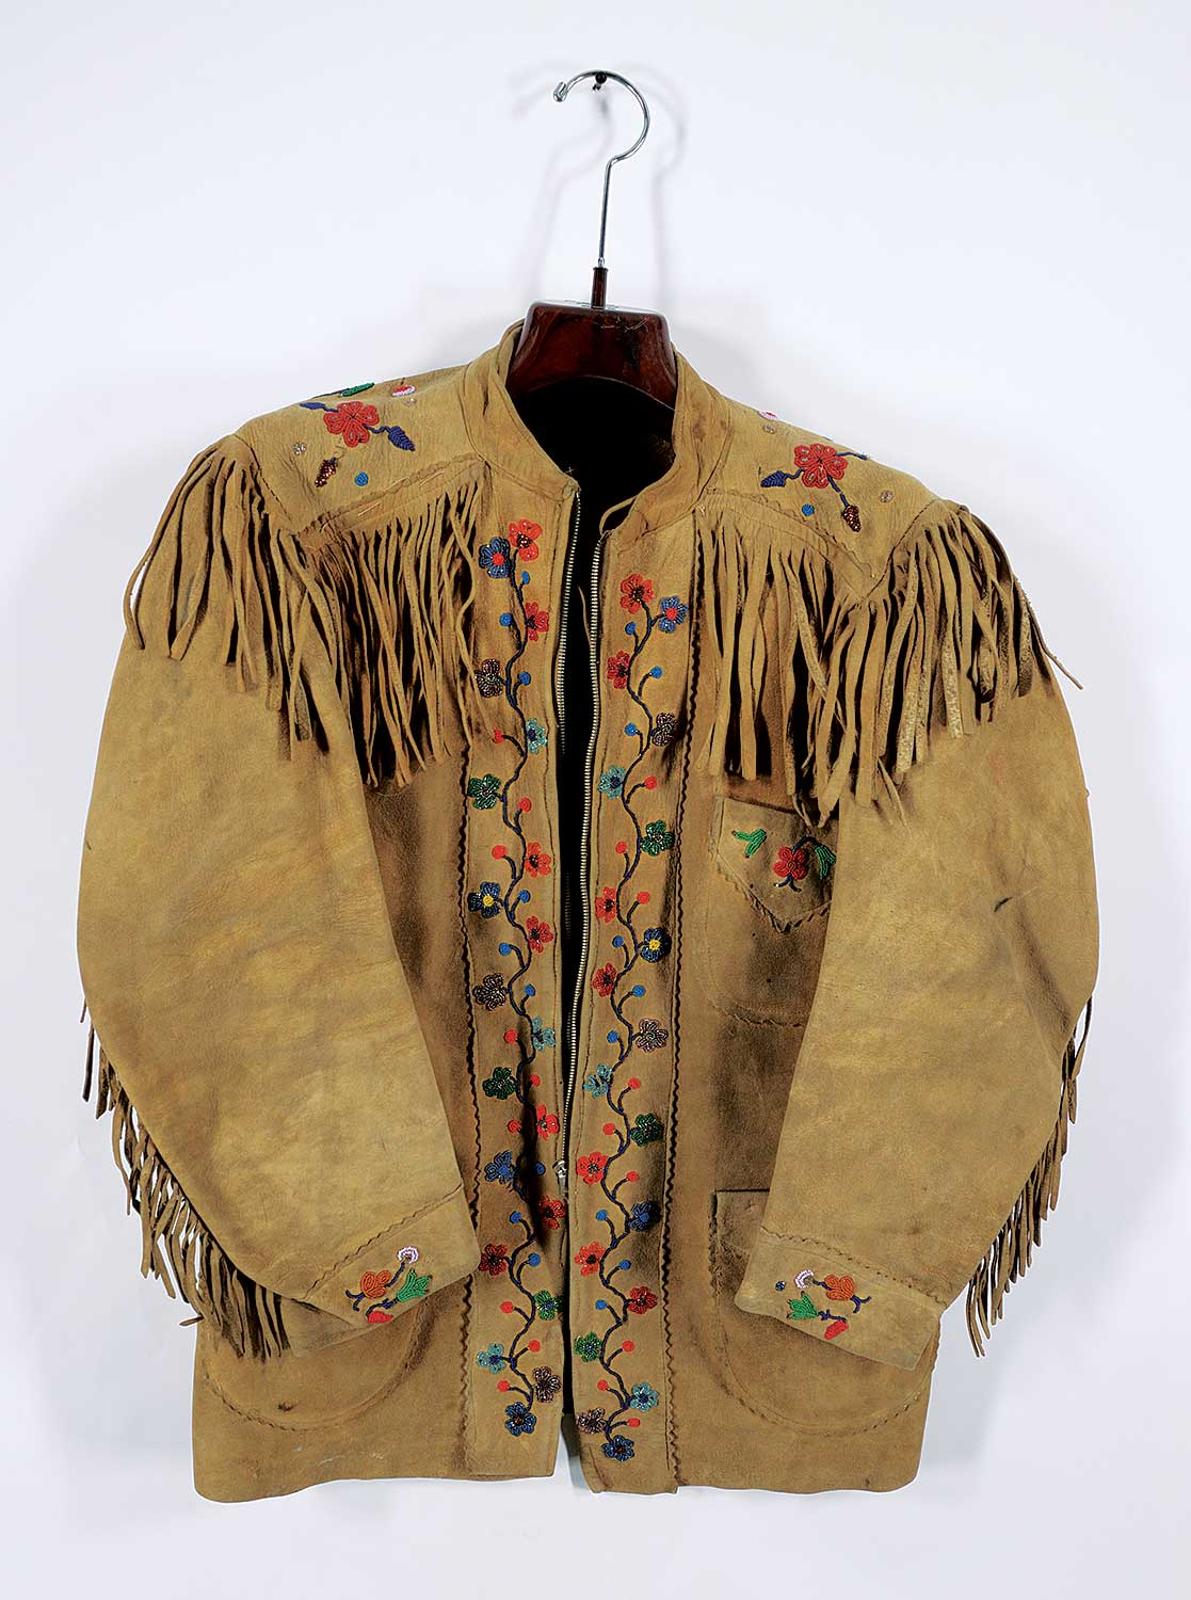 First Nations Basket School - Home Tanned Hide and Beaded Jacket